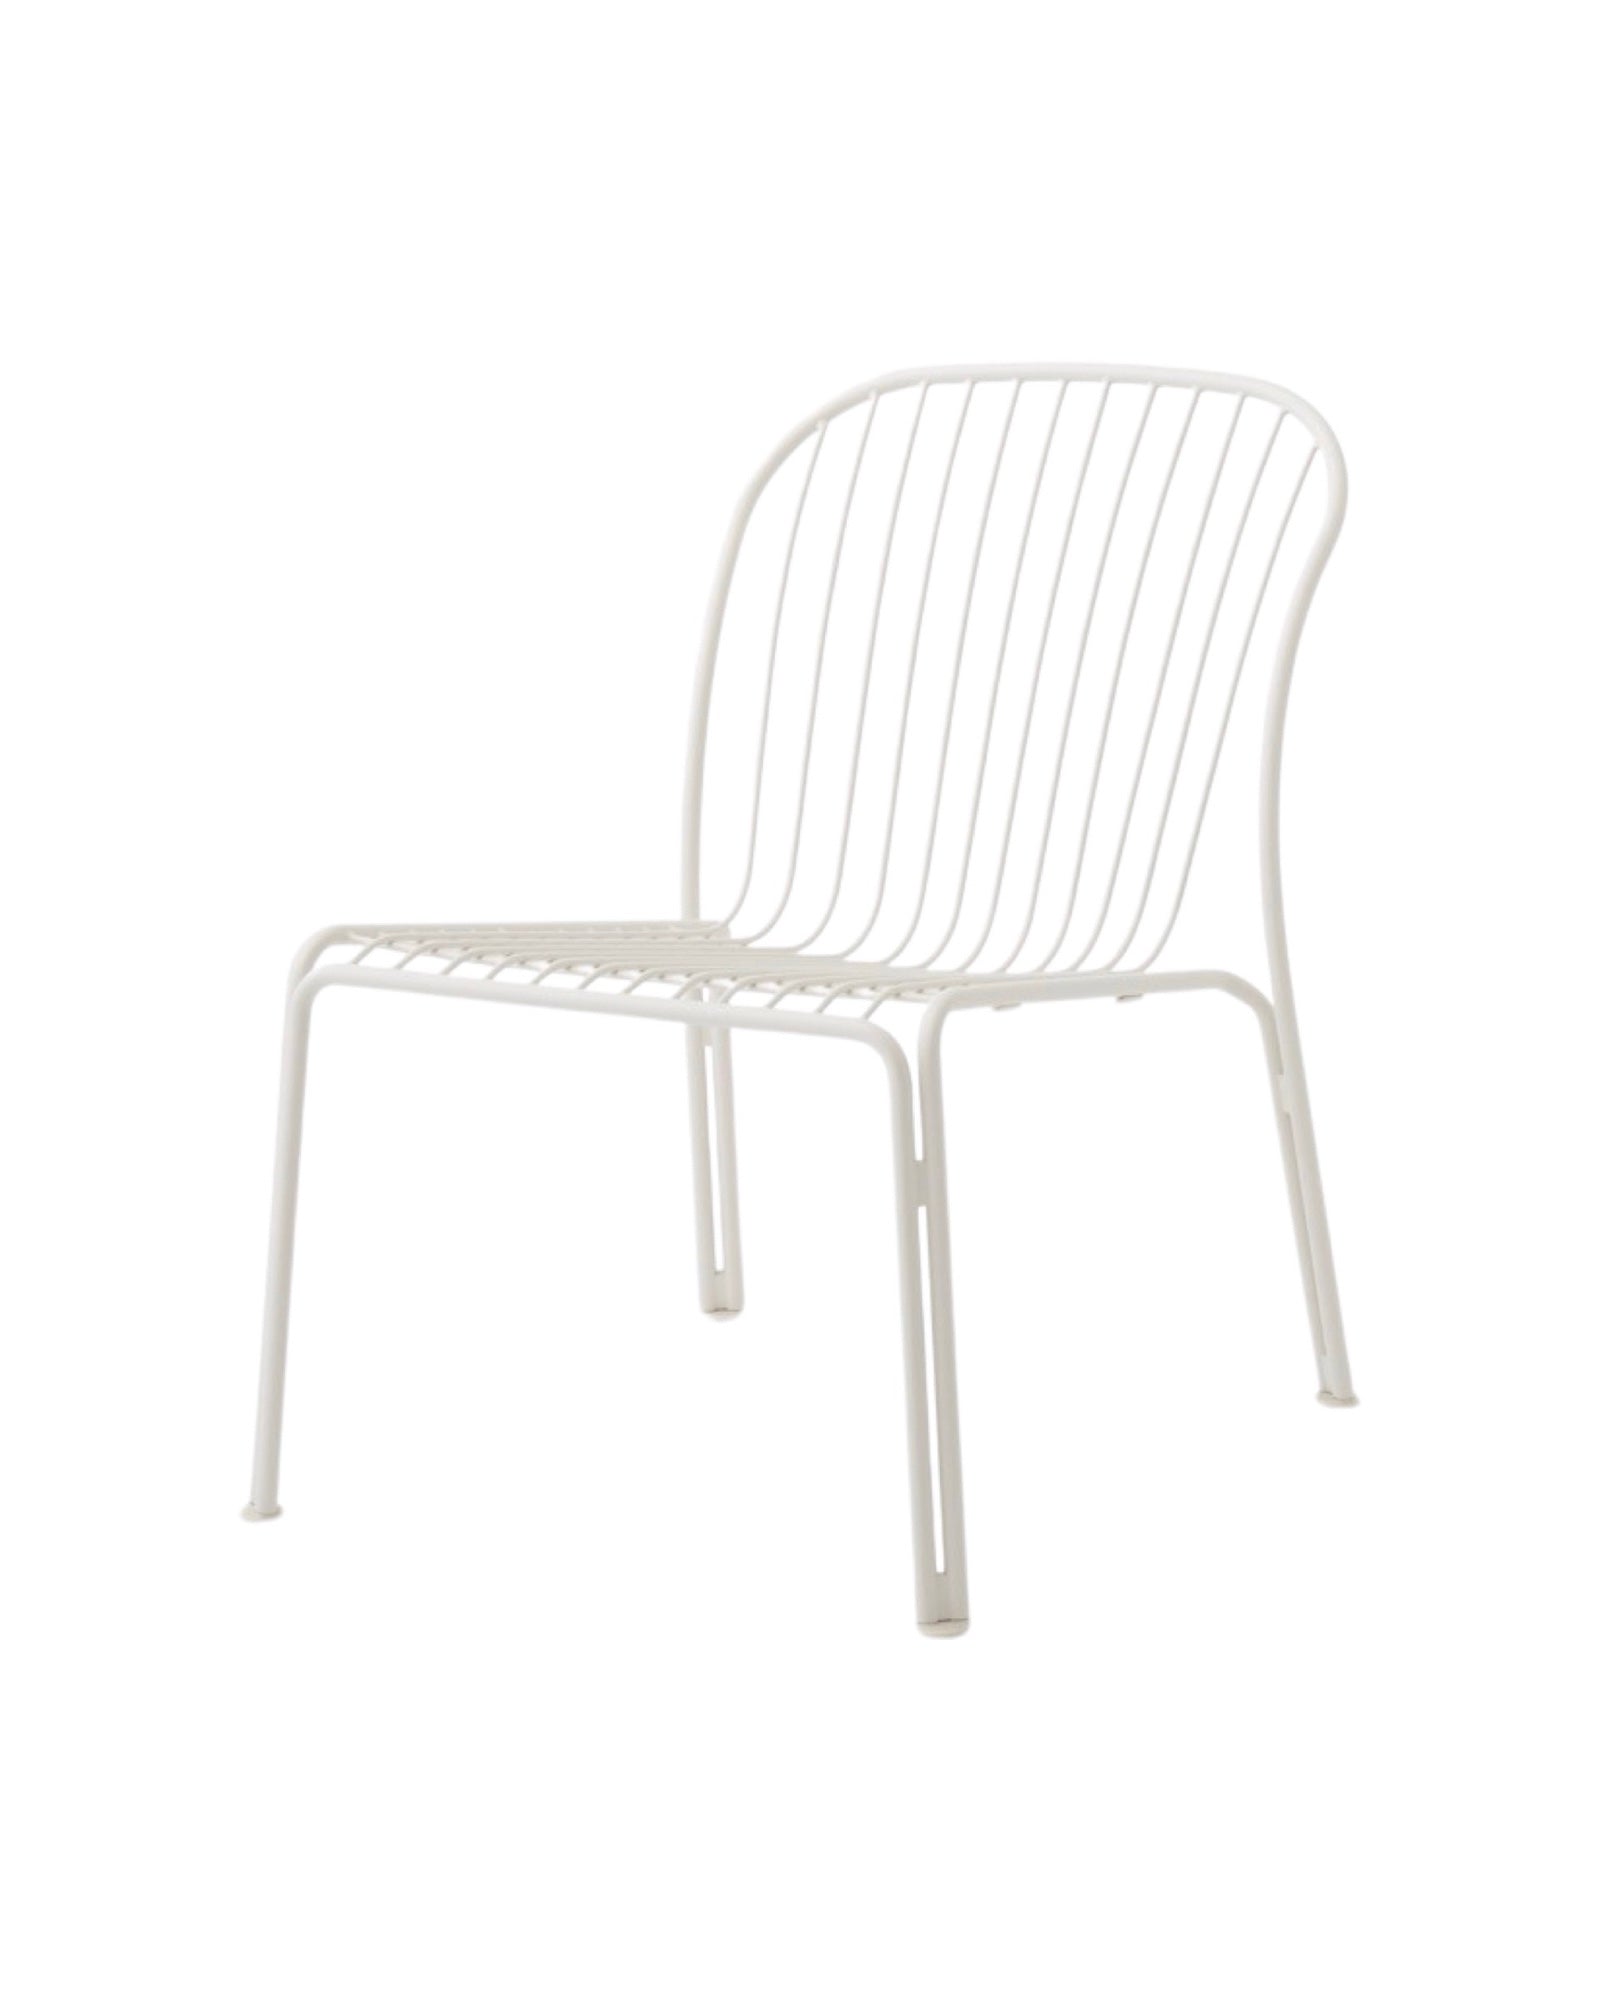 &Tradition Thorvald Lounge Chair SC100